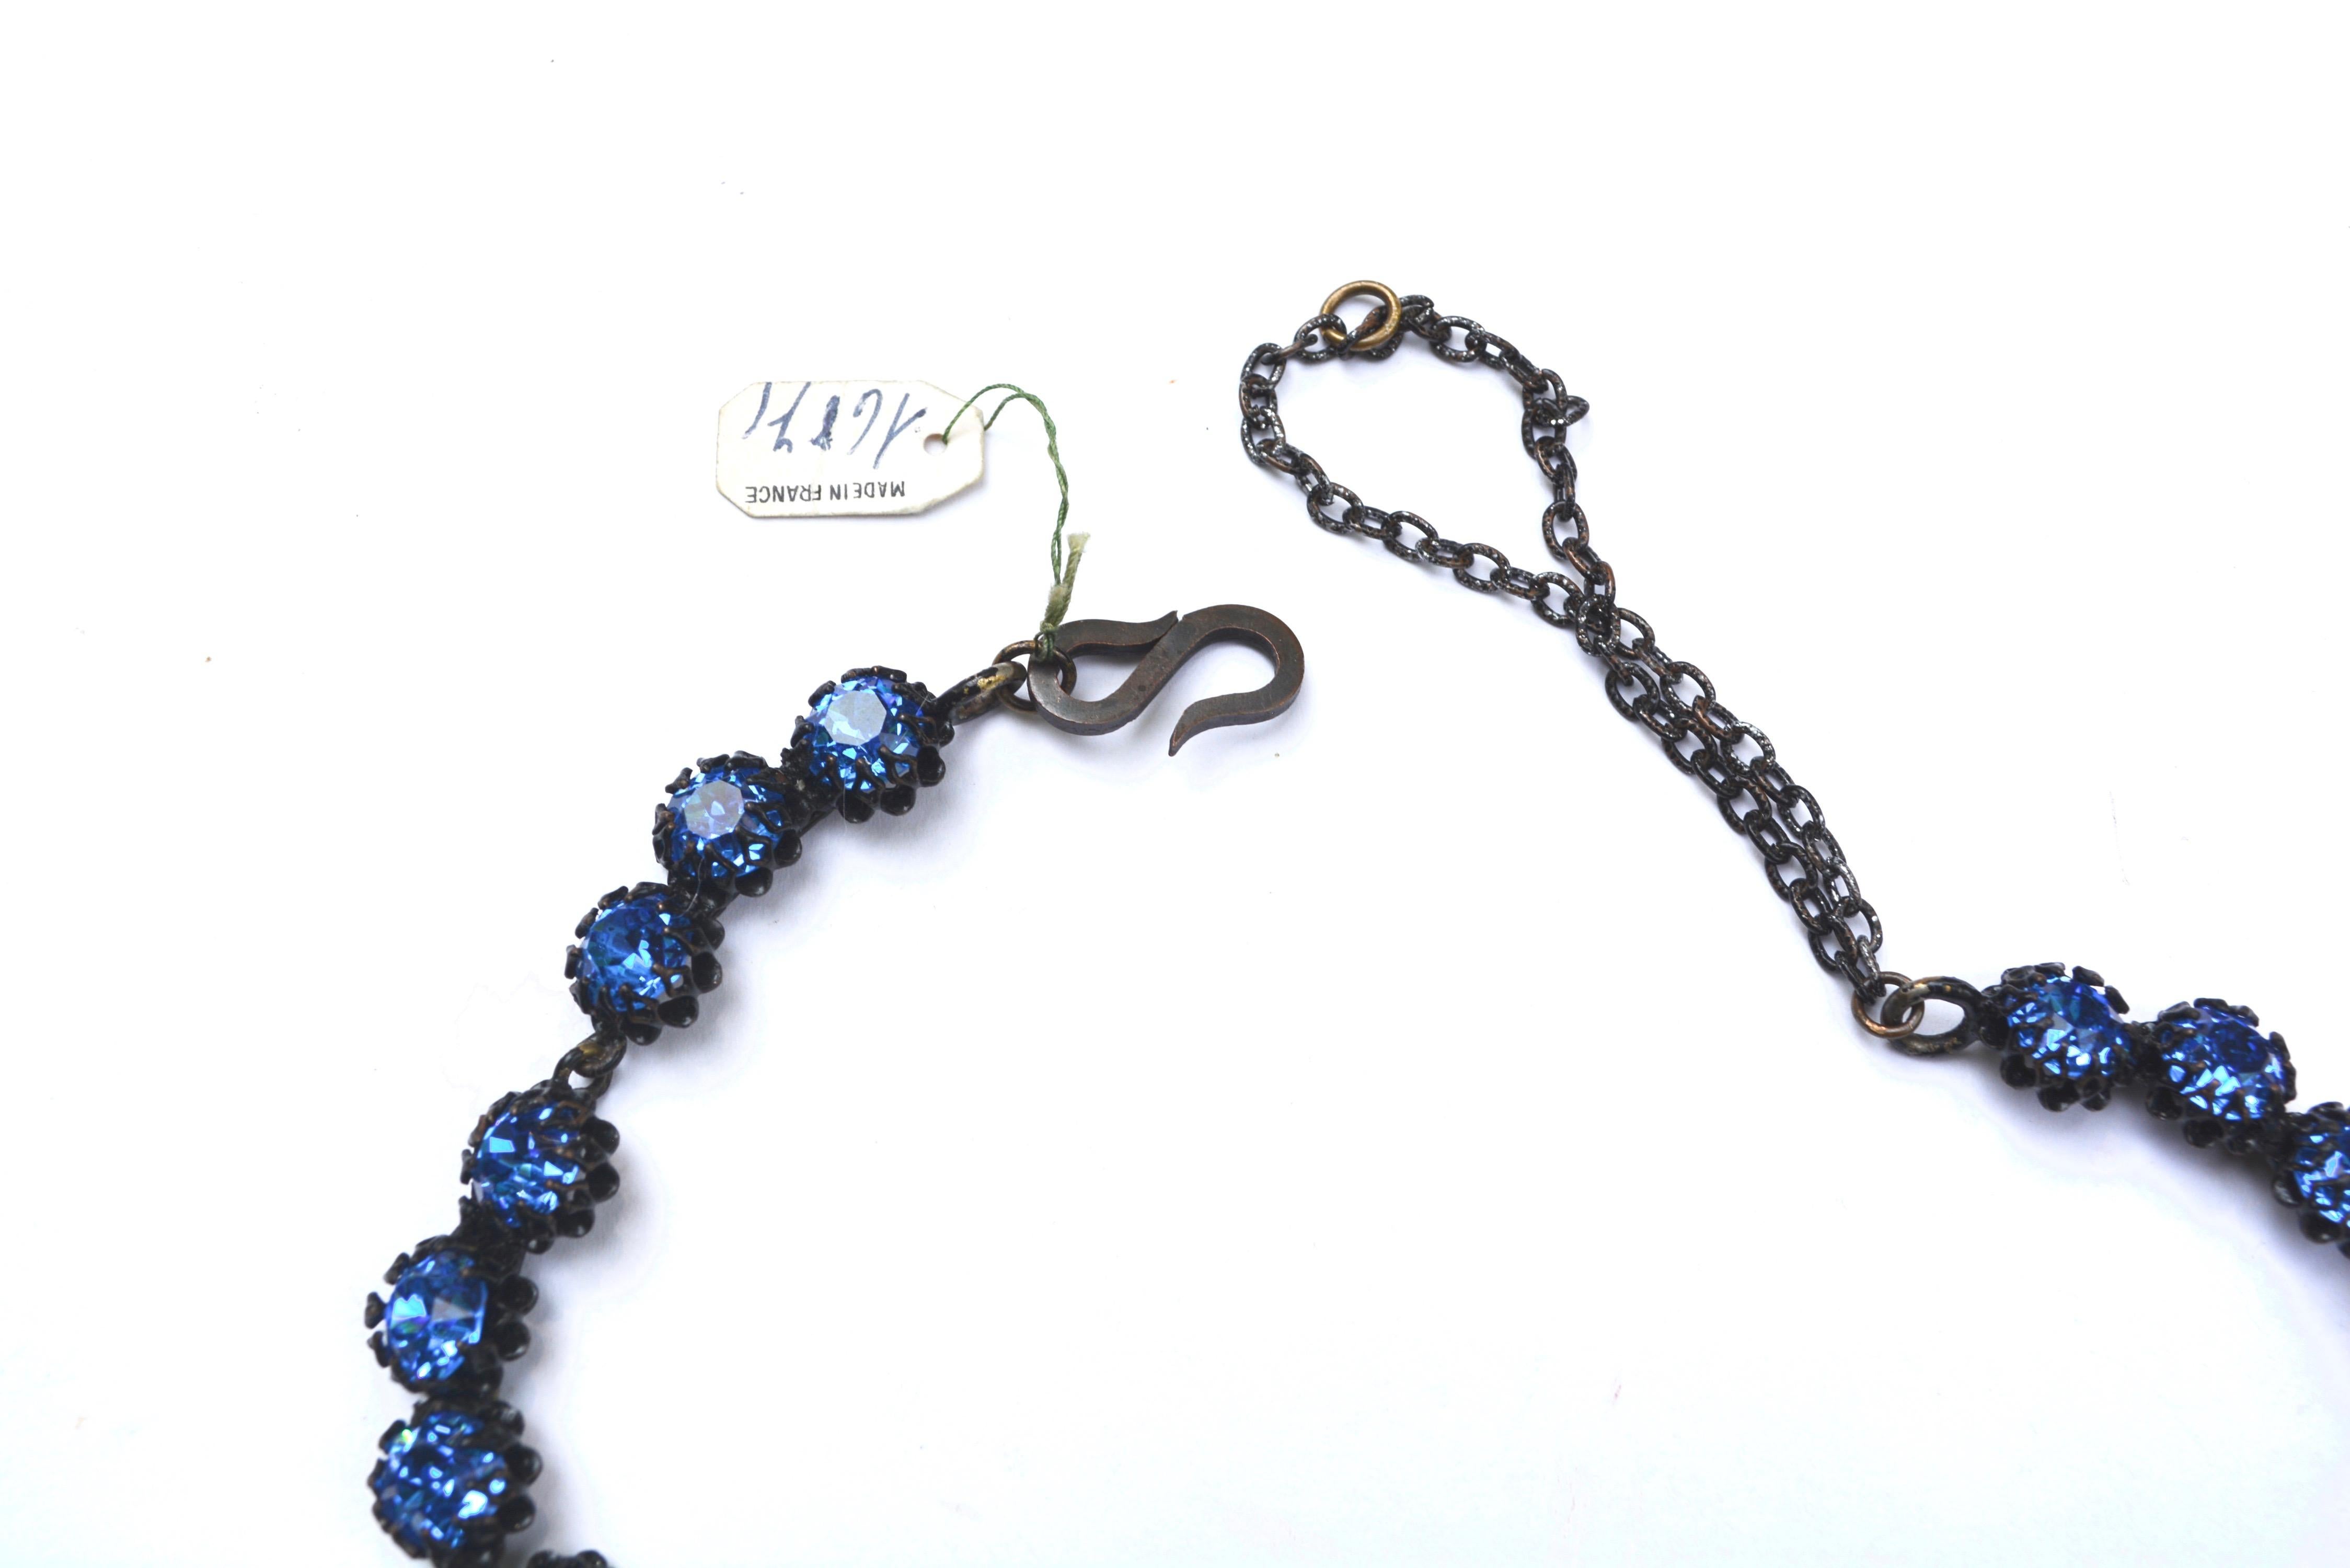 Pretty blue and pearl necklace, with tell tale signs of Dior like the clasp and setting style. Made in France tag still on the original necklace.  Possibly by Francis Winter for Dior as he used this style. Unmarked except for the tag but this isn't